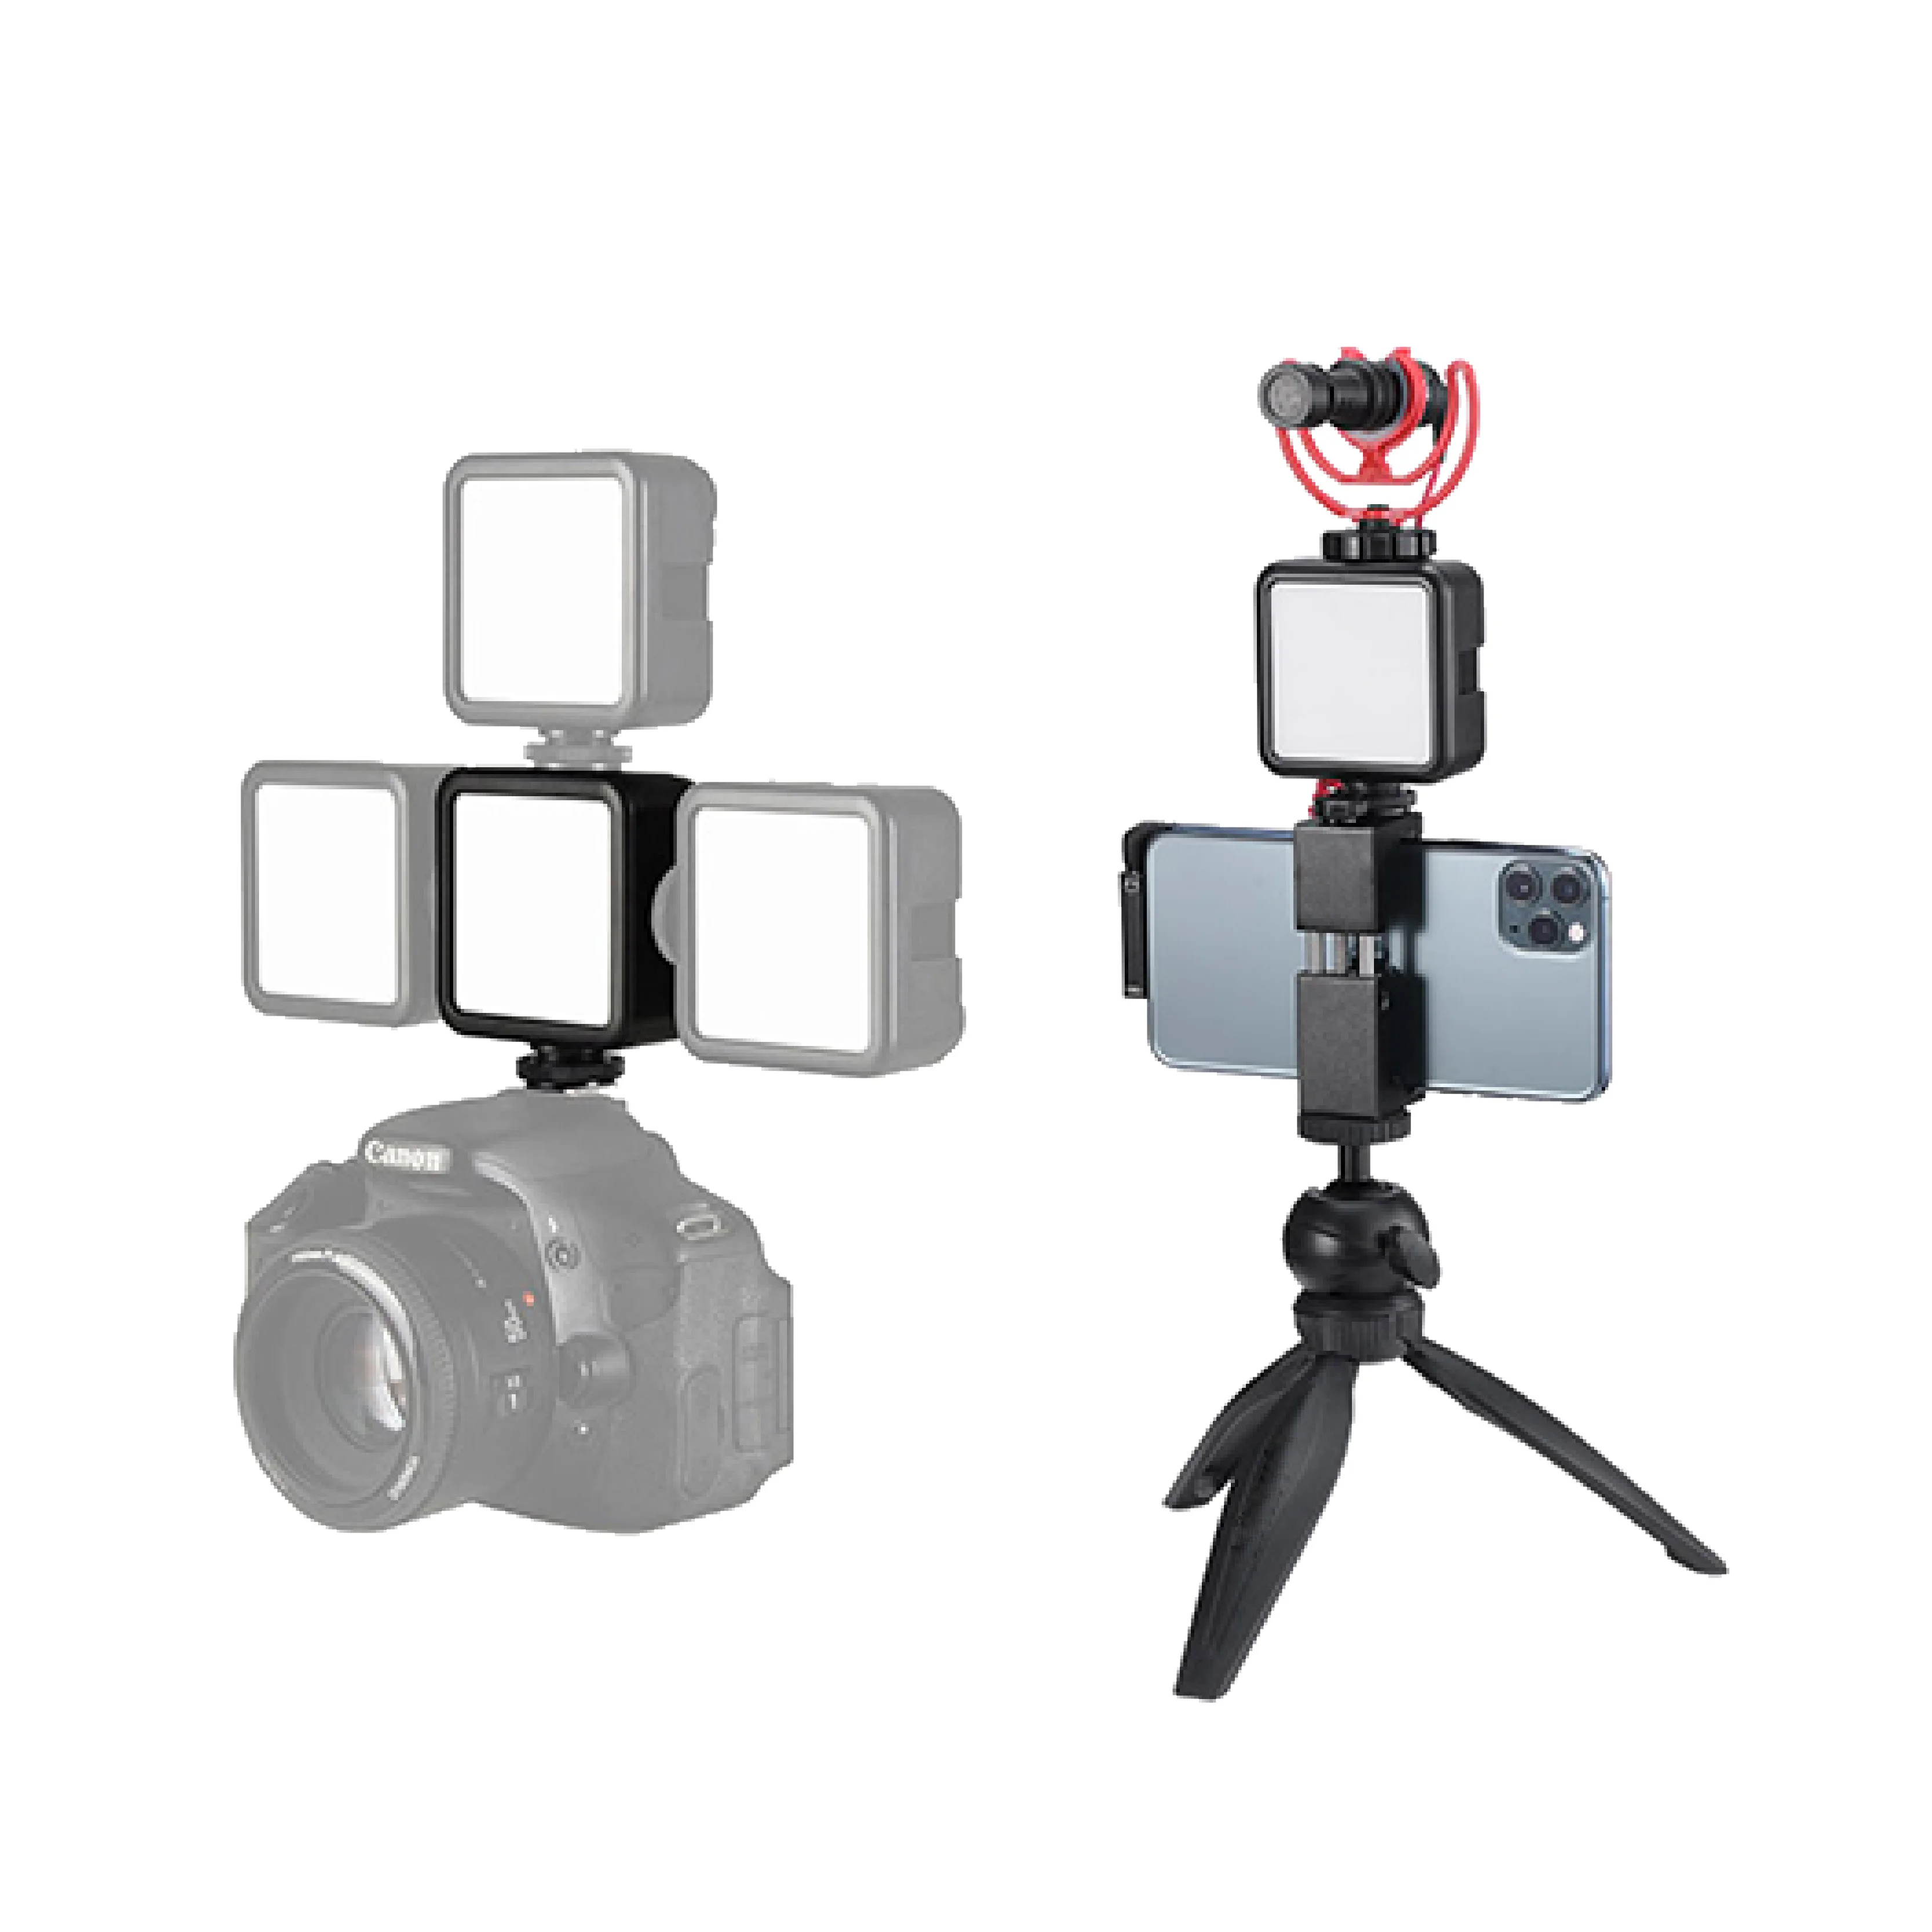 Smartphone Video Rig Kit Recording Video Stabilizer Rig Handle Grip with Microphones,Professional Studio Light